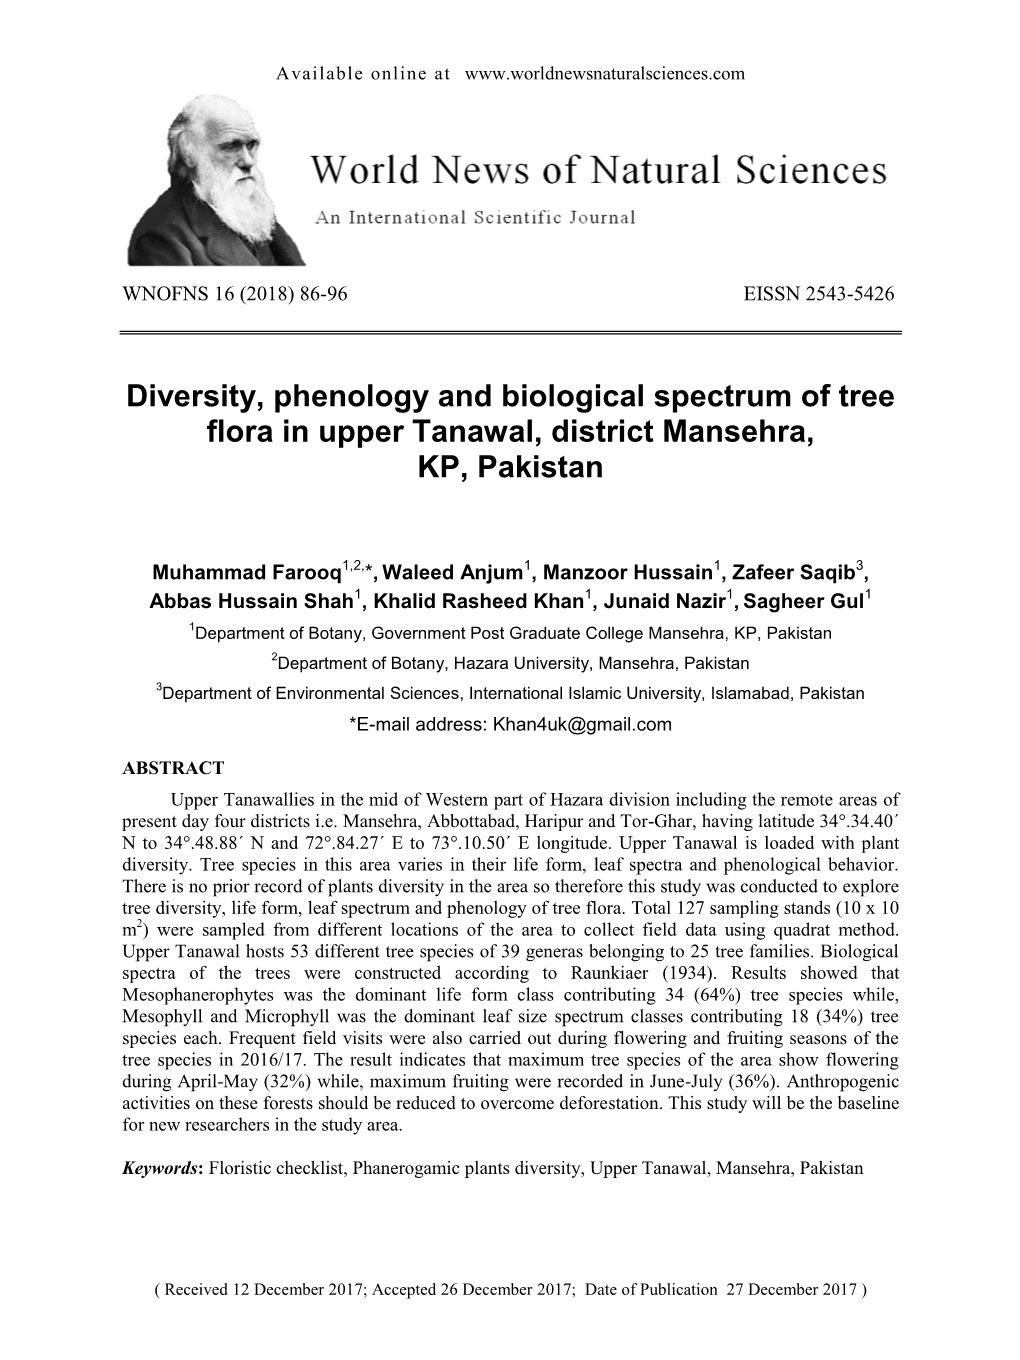 Diversity, Phenology and Biological Spectrum of Tree Flora in Upper Tanawal, District Mansehra, KP, Pakistan